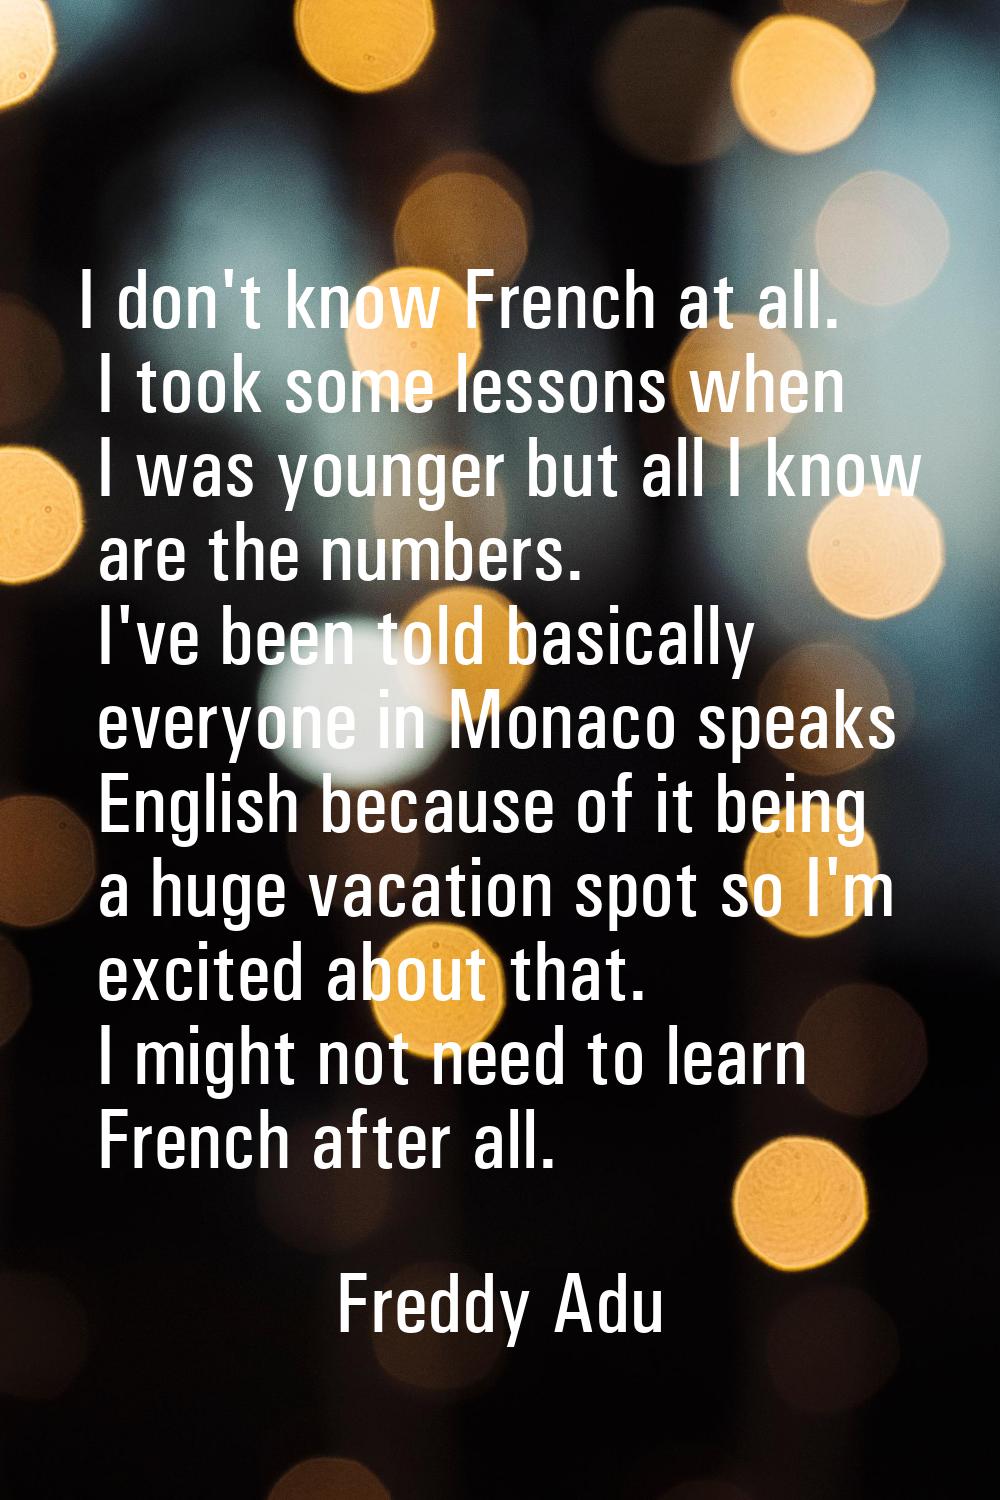 I don't know French at all. I took some lessons when I was younger but all I know are the numbers. 